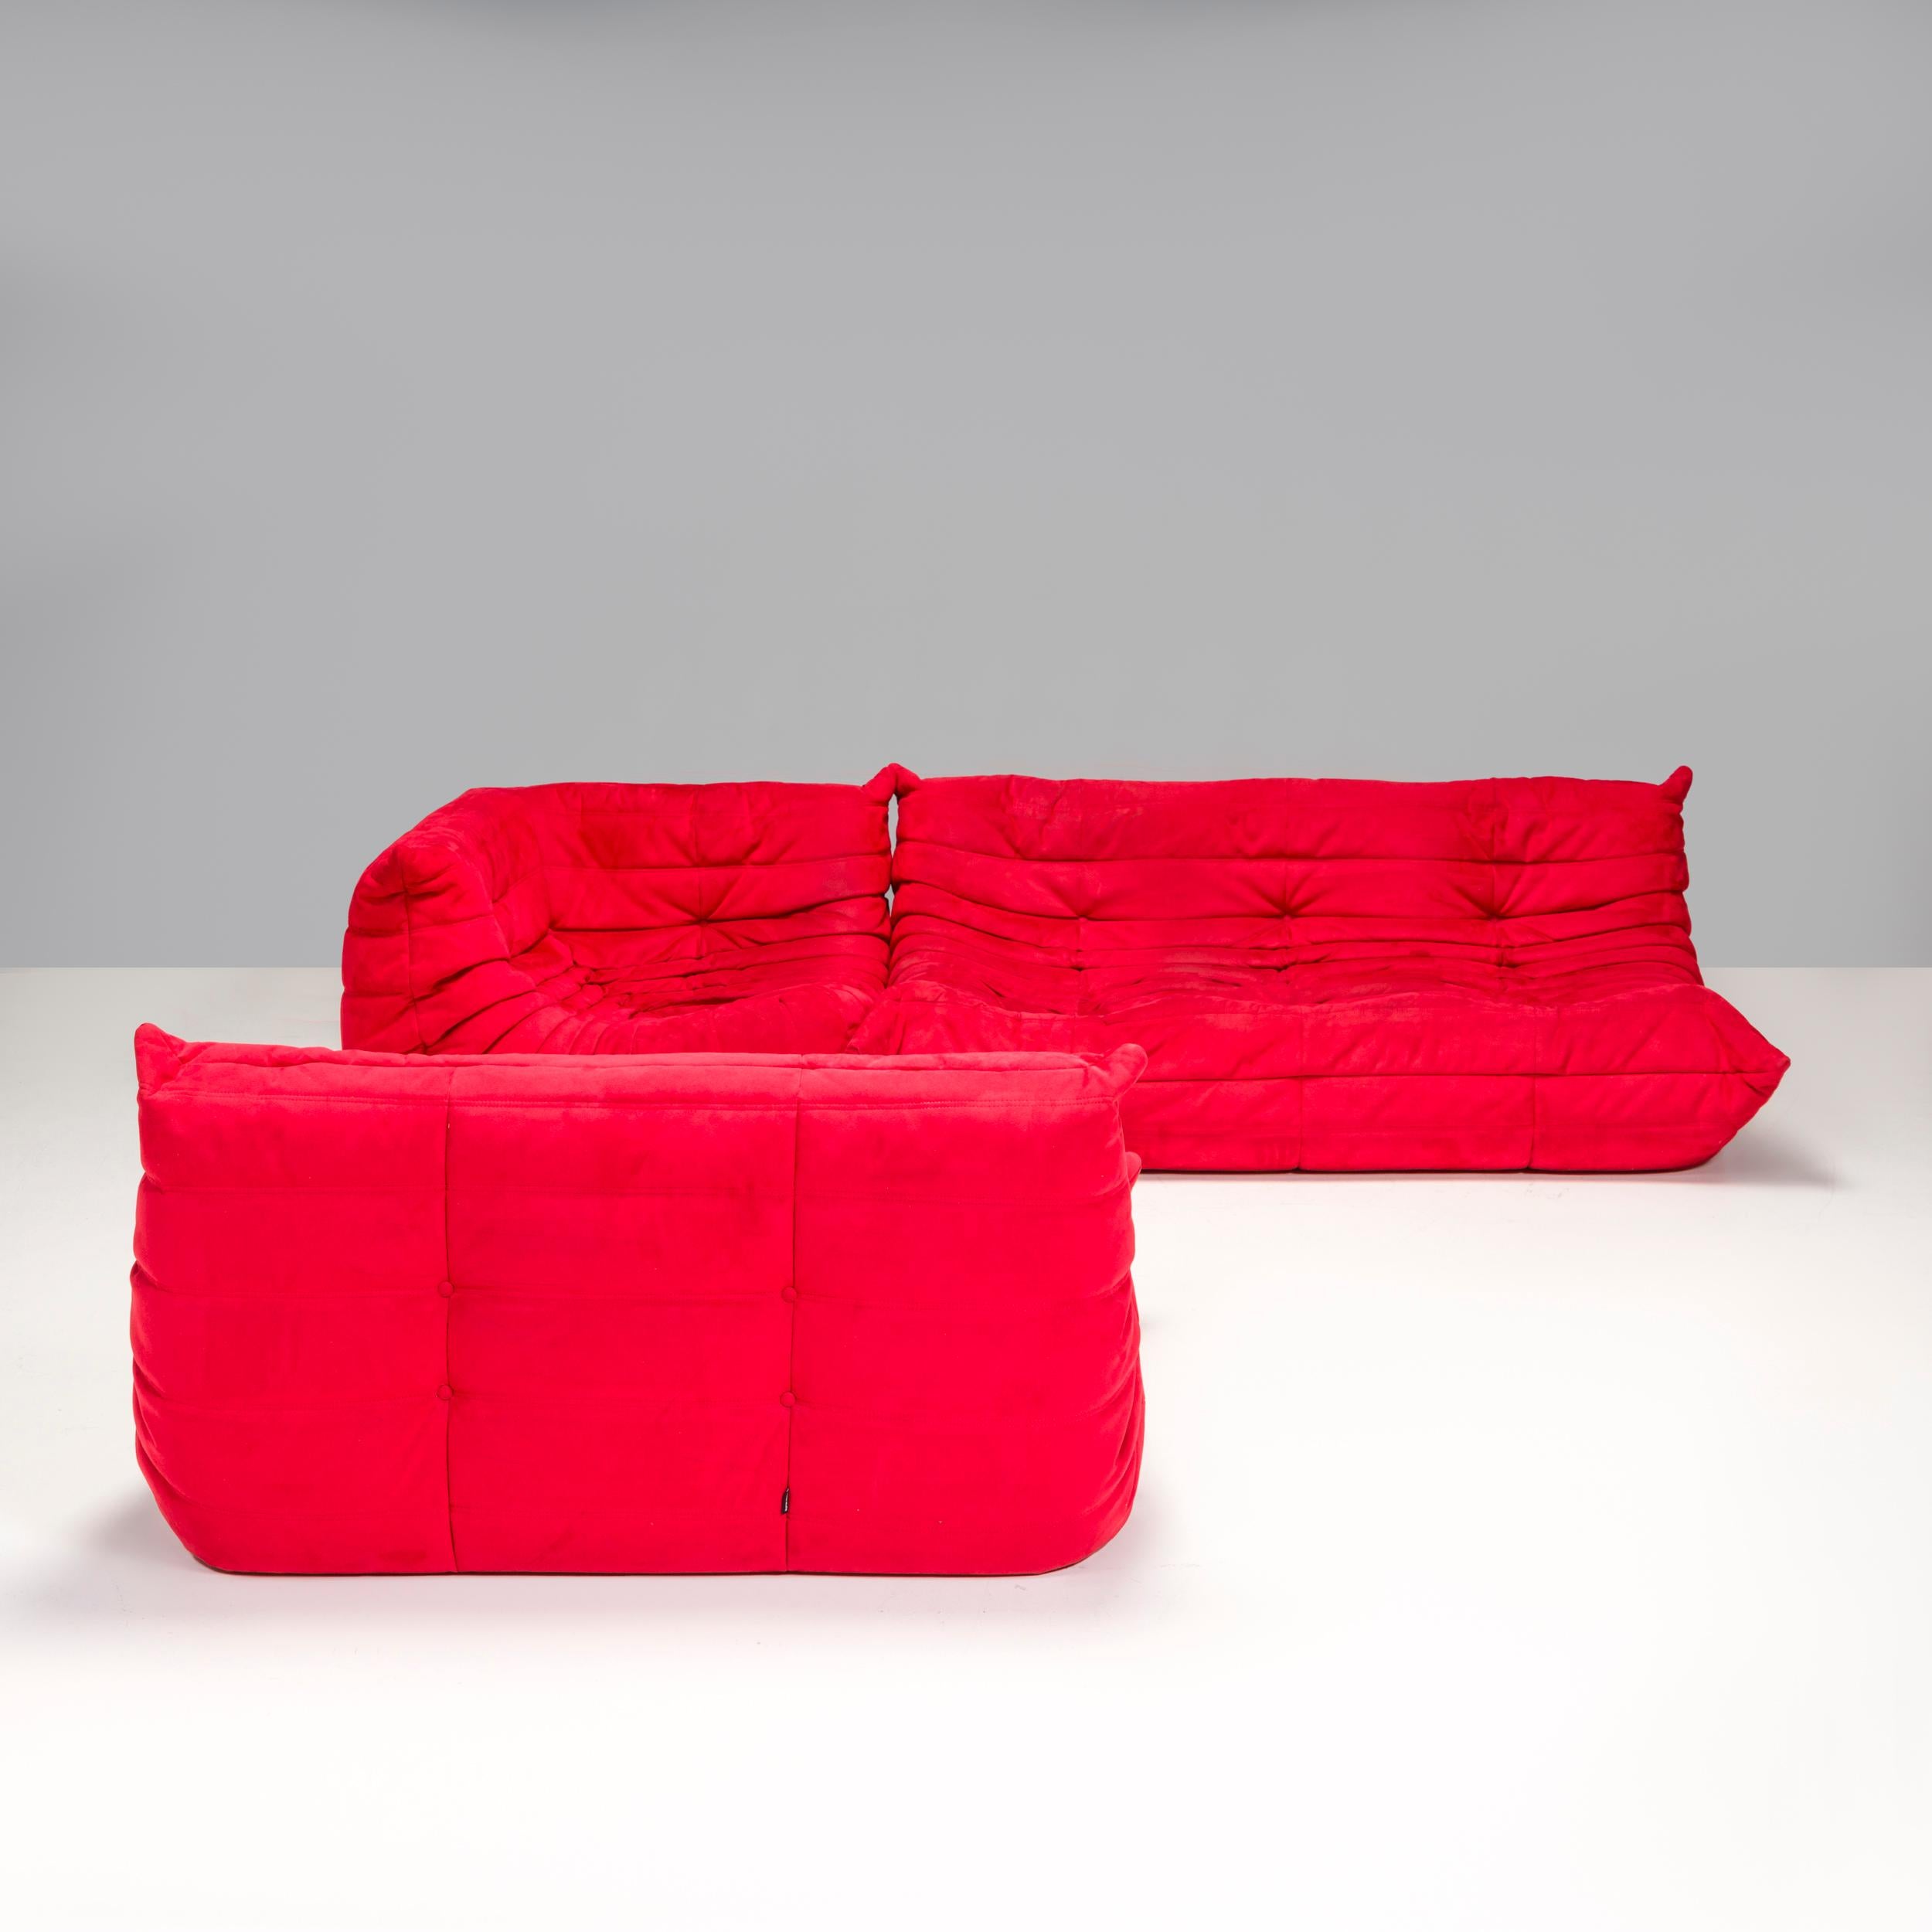 The iconic Togo sofa, originally designed by Michel Ducaroy for Ligne Roset in 1973, has become a design classic.

This three-piece modular set is incredibly versatile and can be configured into one large corner sofa or split for a multitude of